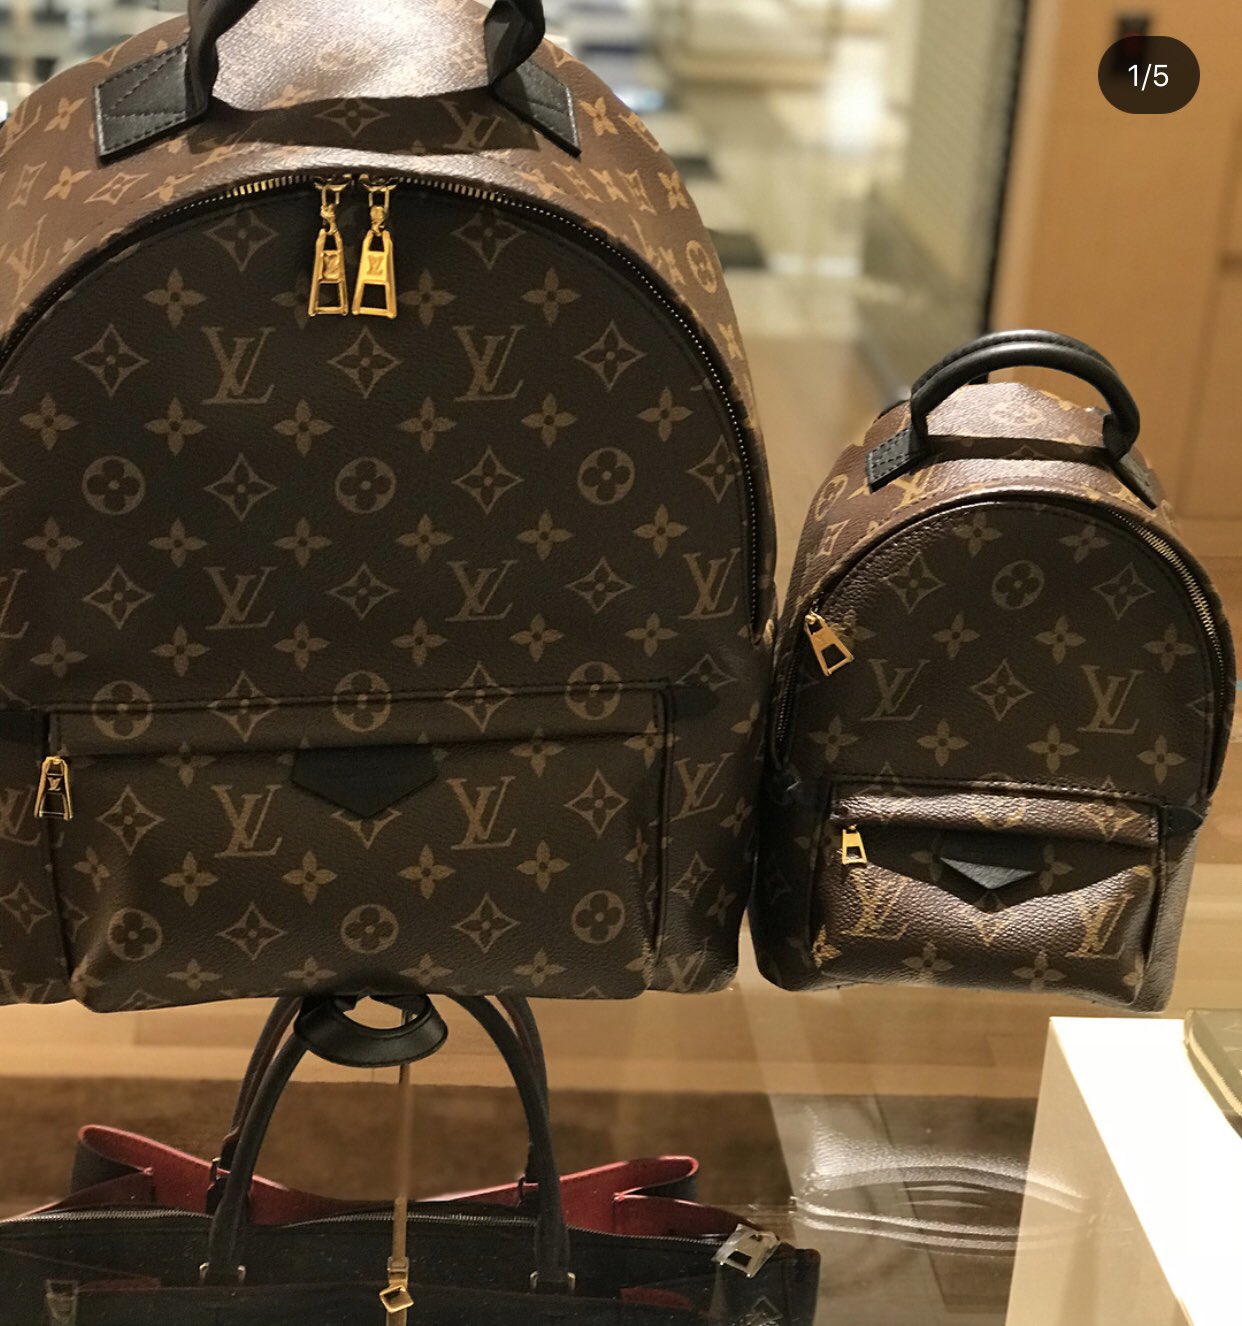 Evettexo sa X: Side by side of the mini bag I got compared to the one I'm  thinking about getting for my diaper bag !! Palm Springs Mm vs. Mini   /